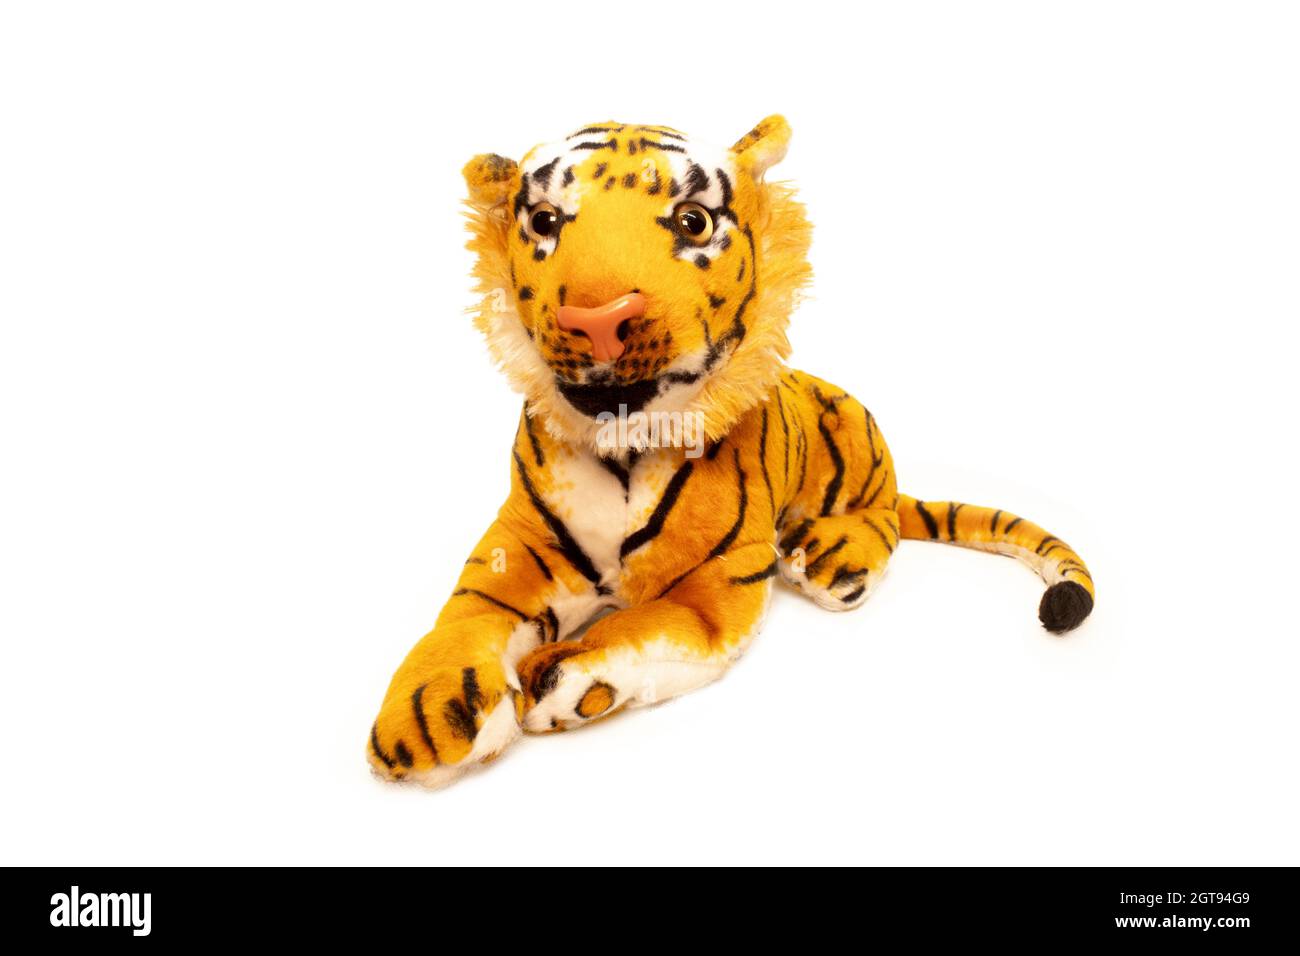 Tiger doll isolated on white background. Bengal tiger doll isolated. Stock Photo